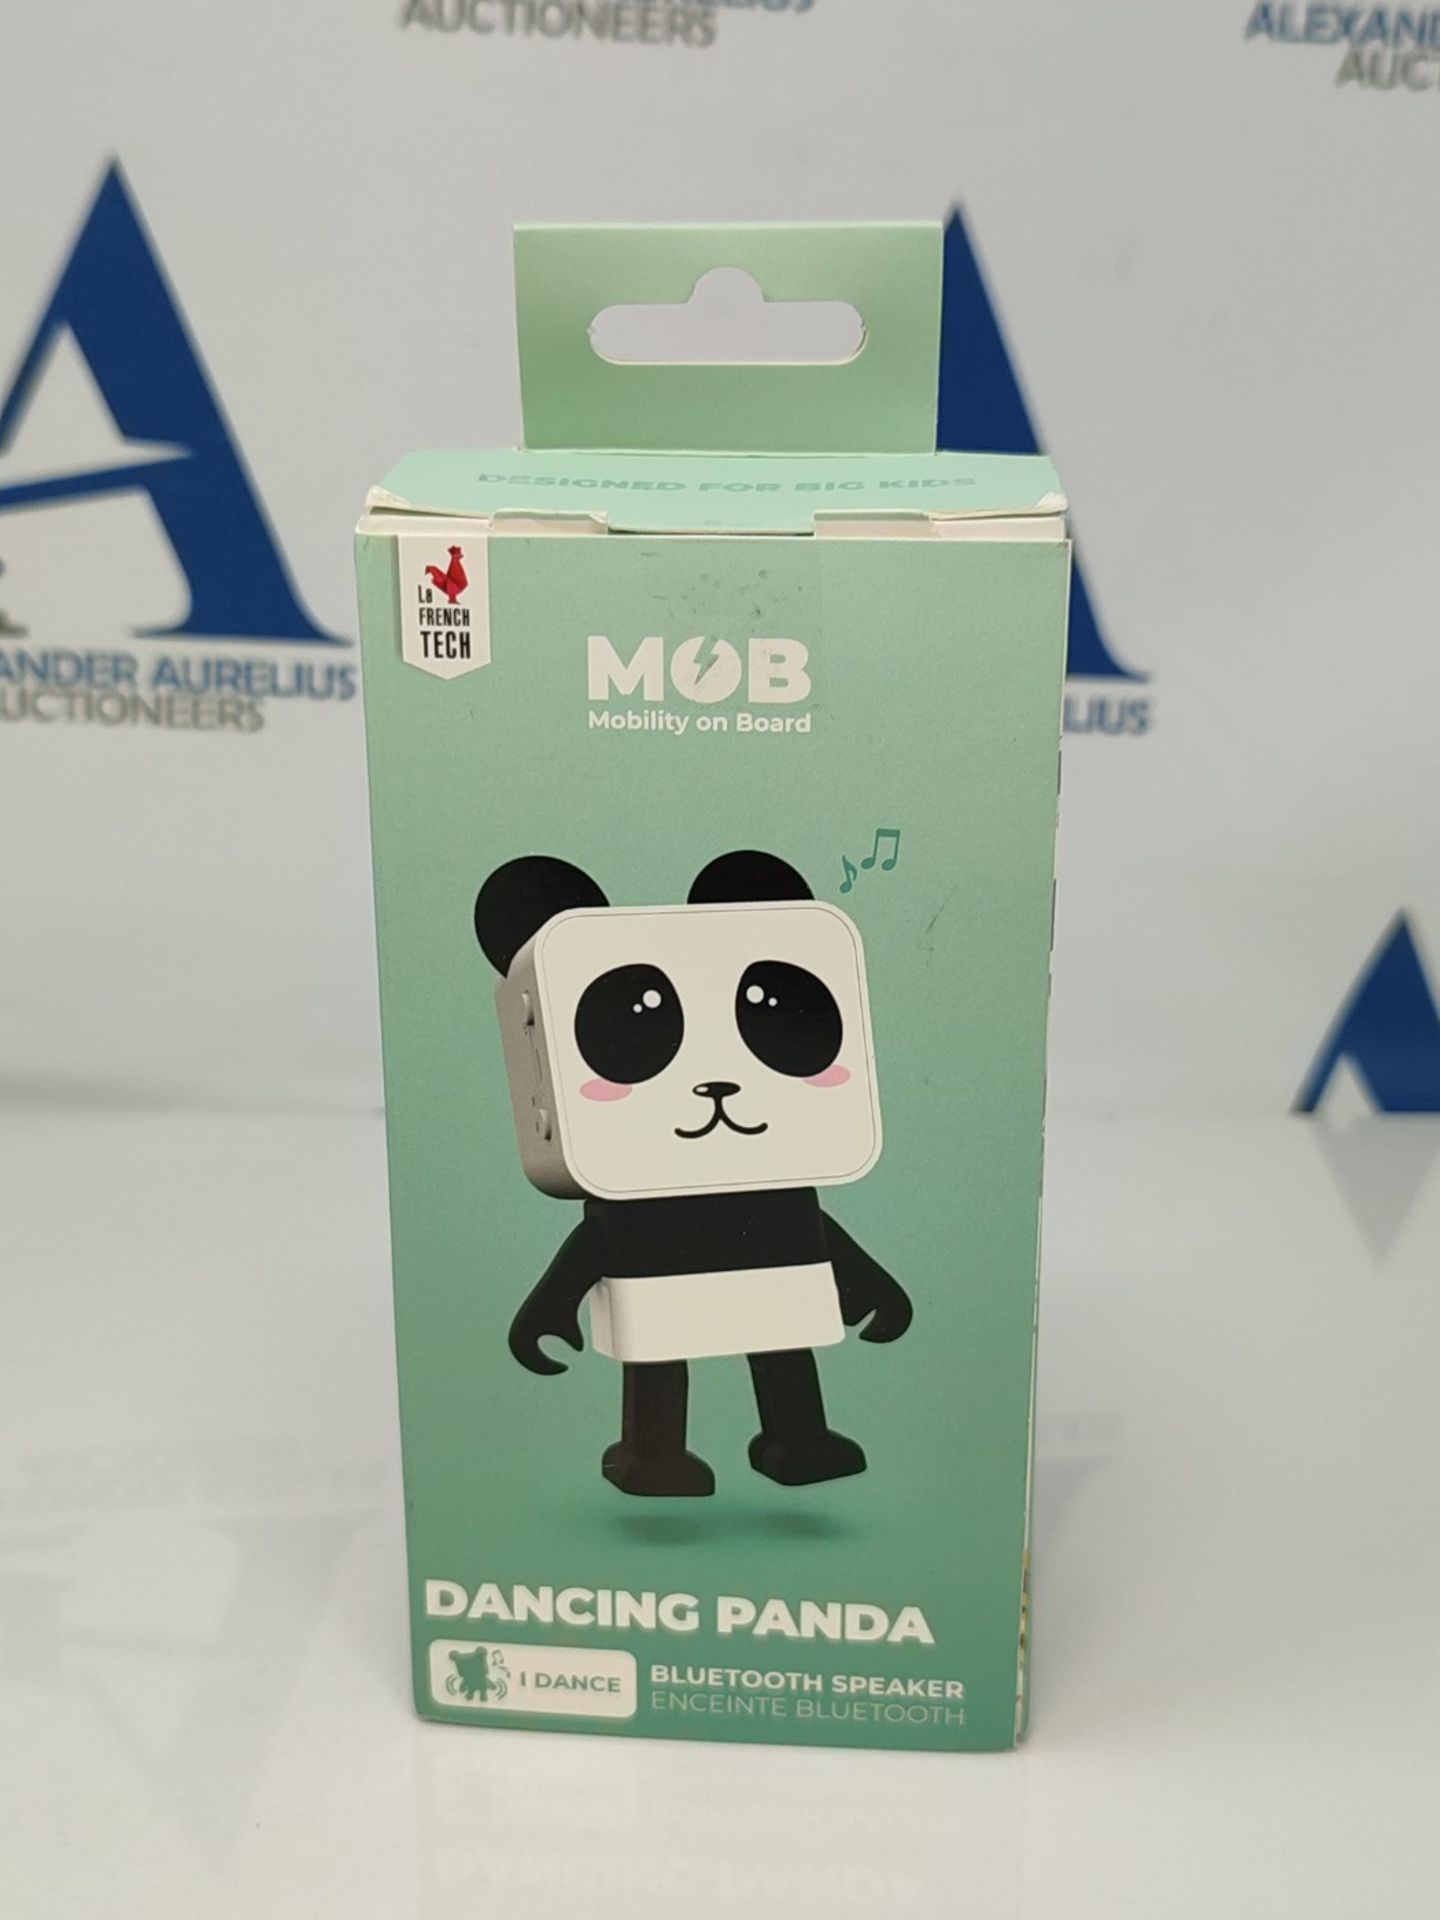 Mobility on Board - Speakers for Animal Dance Party (Panda) - Image 5 of 6